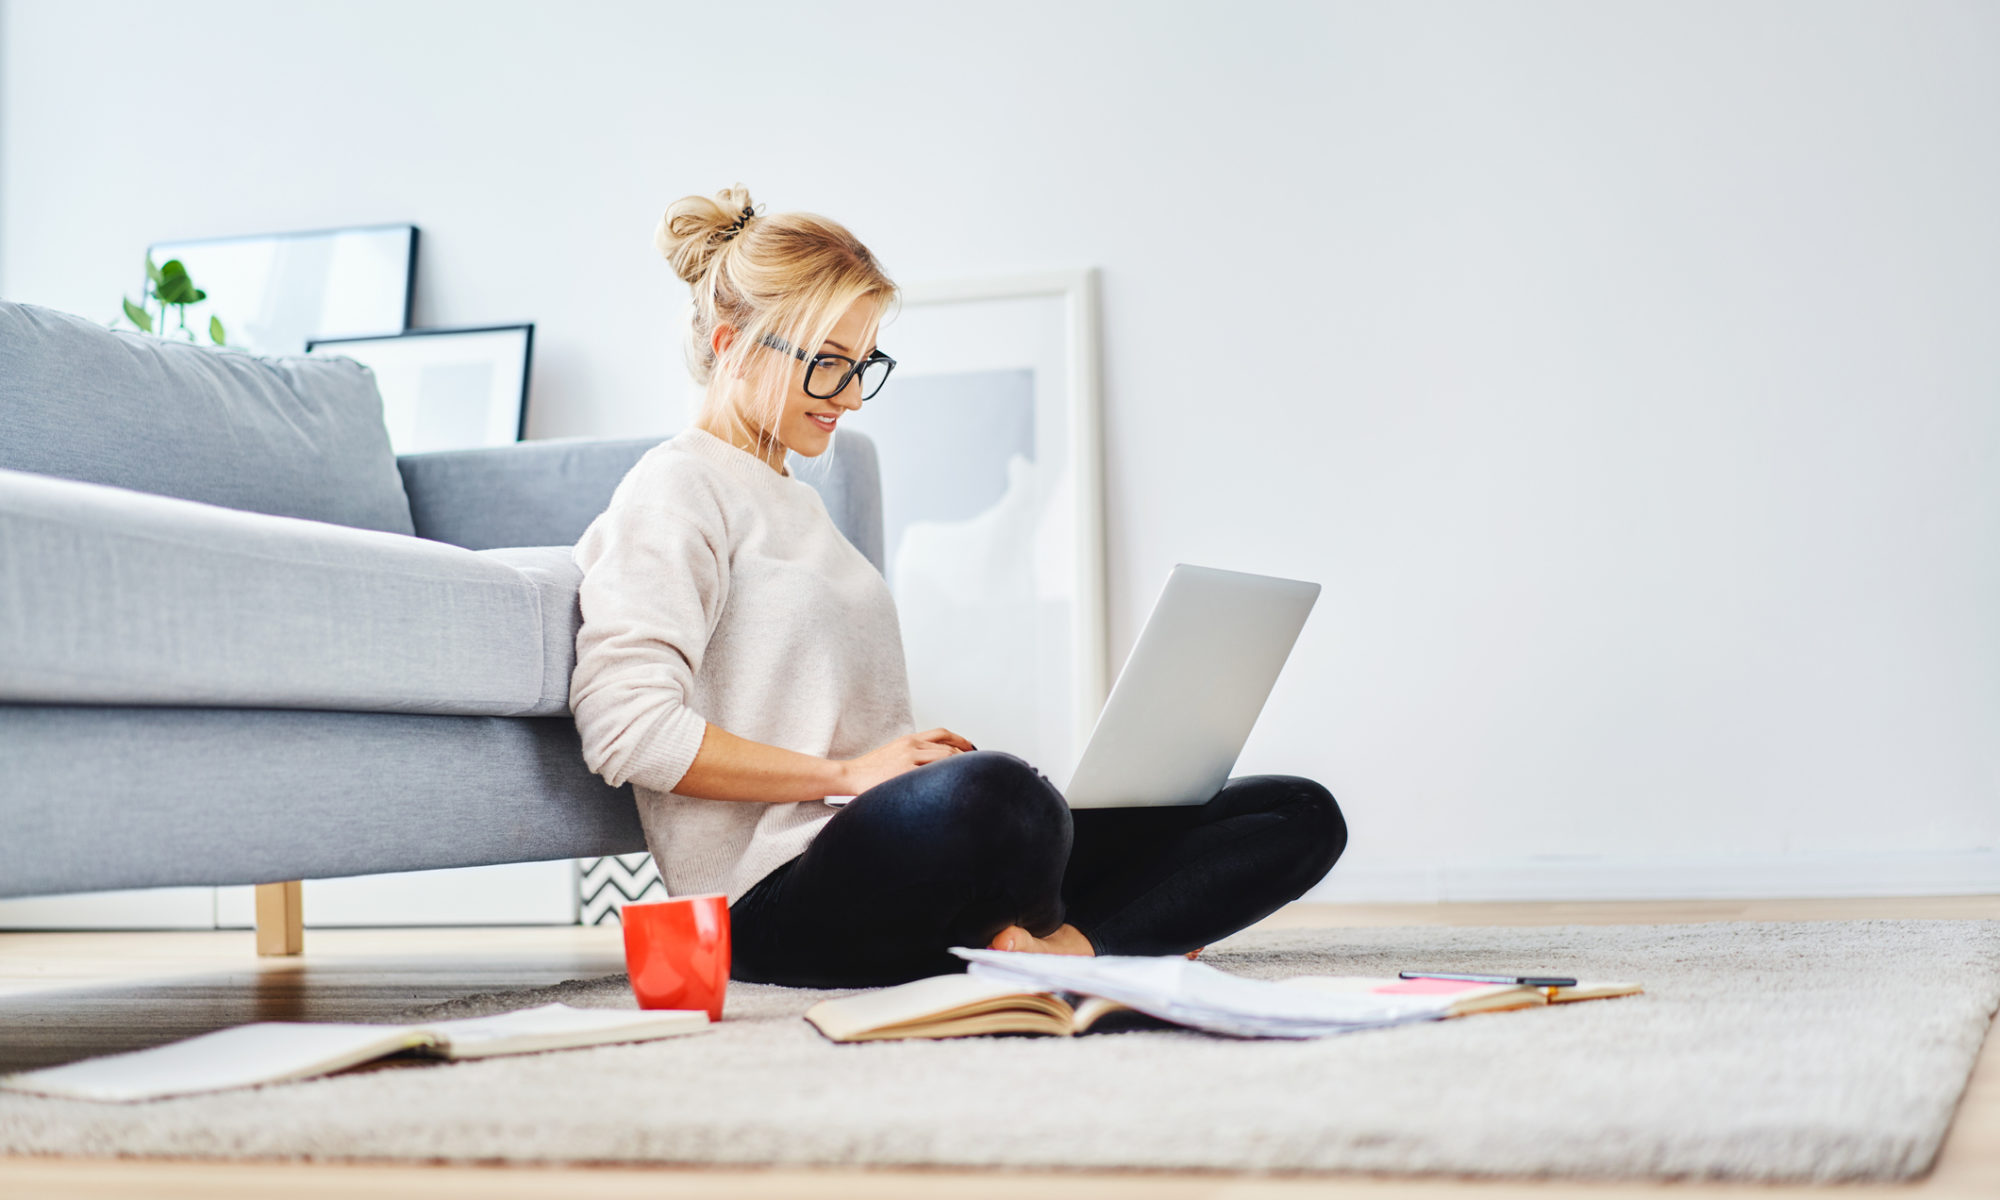 Female small business owner working at home and using her laptop to help her business rank higher on Google. She is sat on the floor of her living room, leaning against a grey sofa.